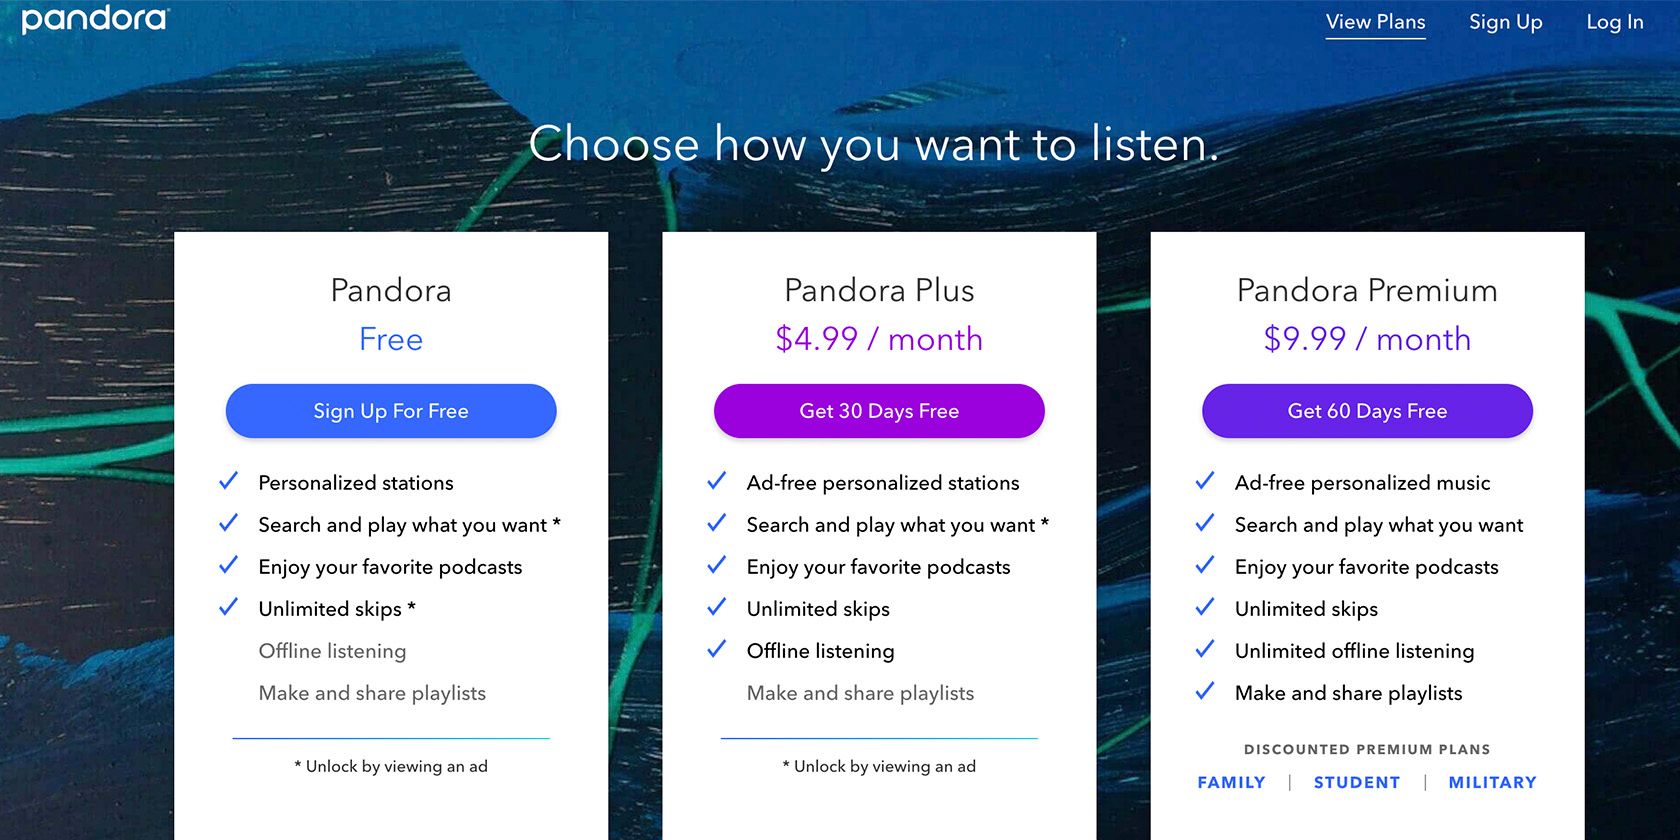 Spotify vs. Pandora: Which Is Better?